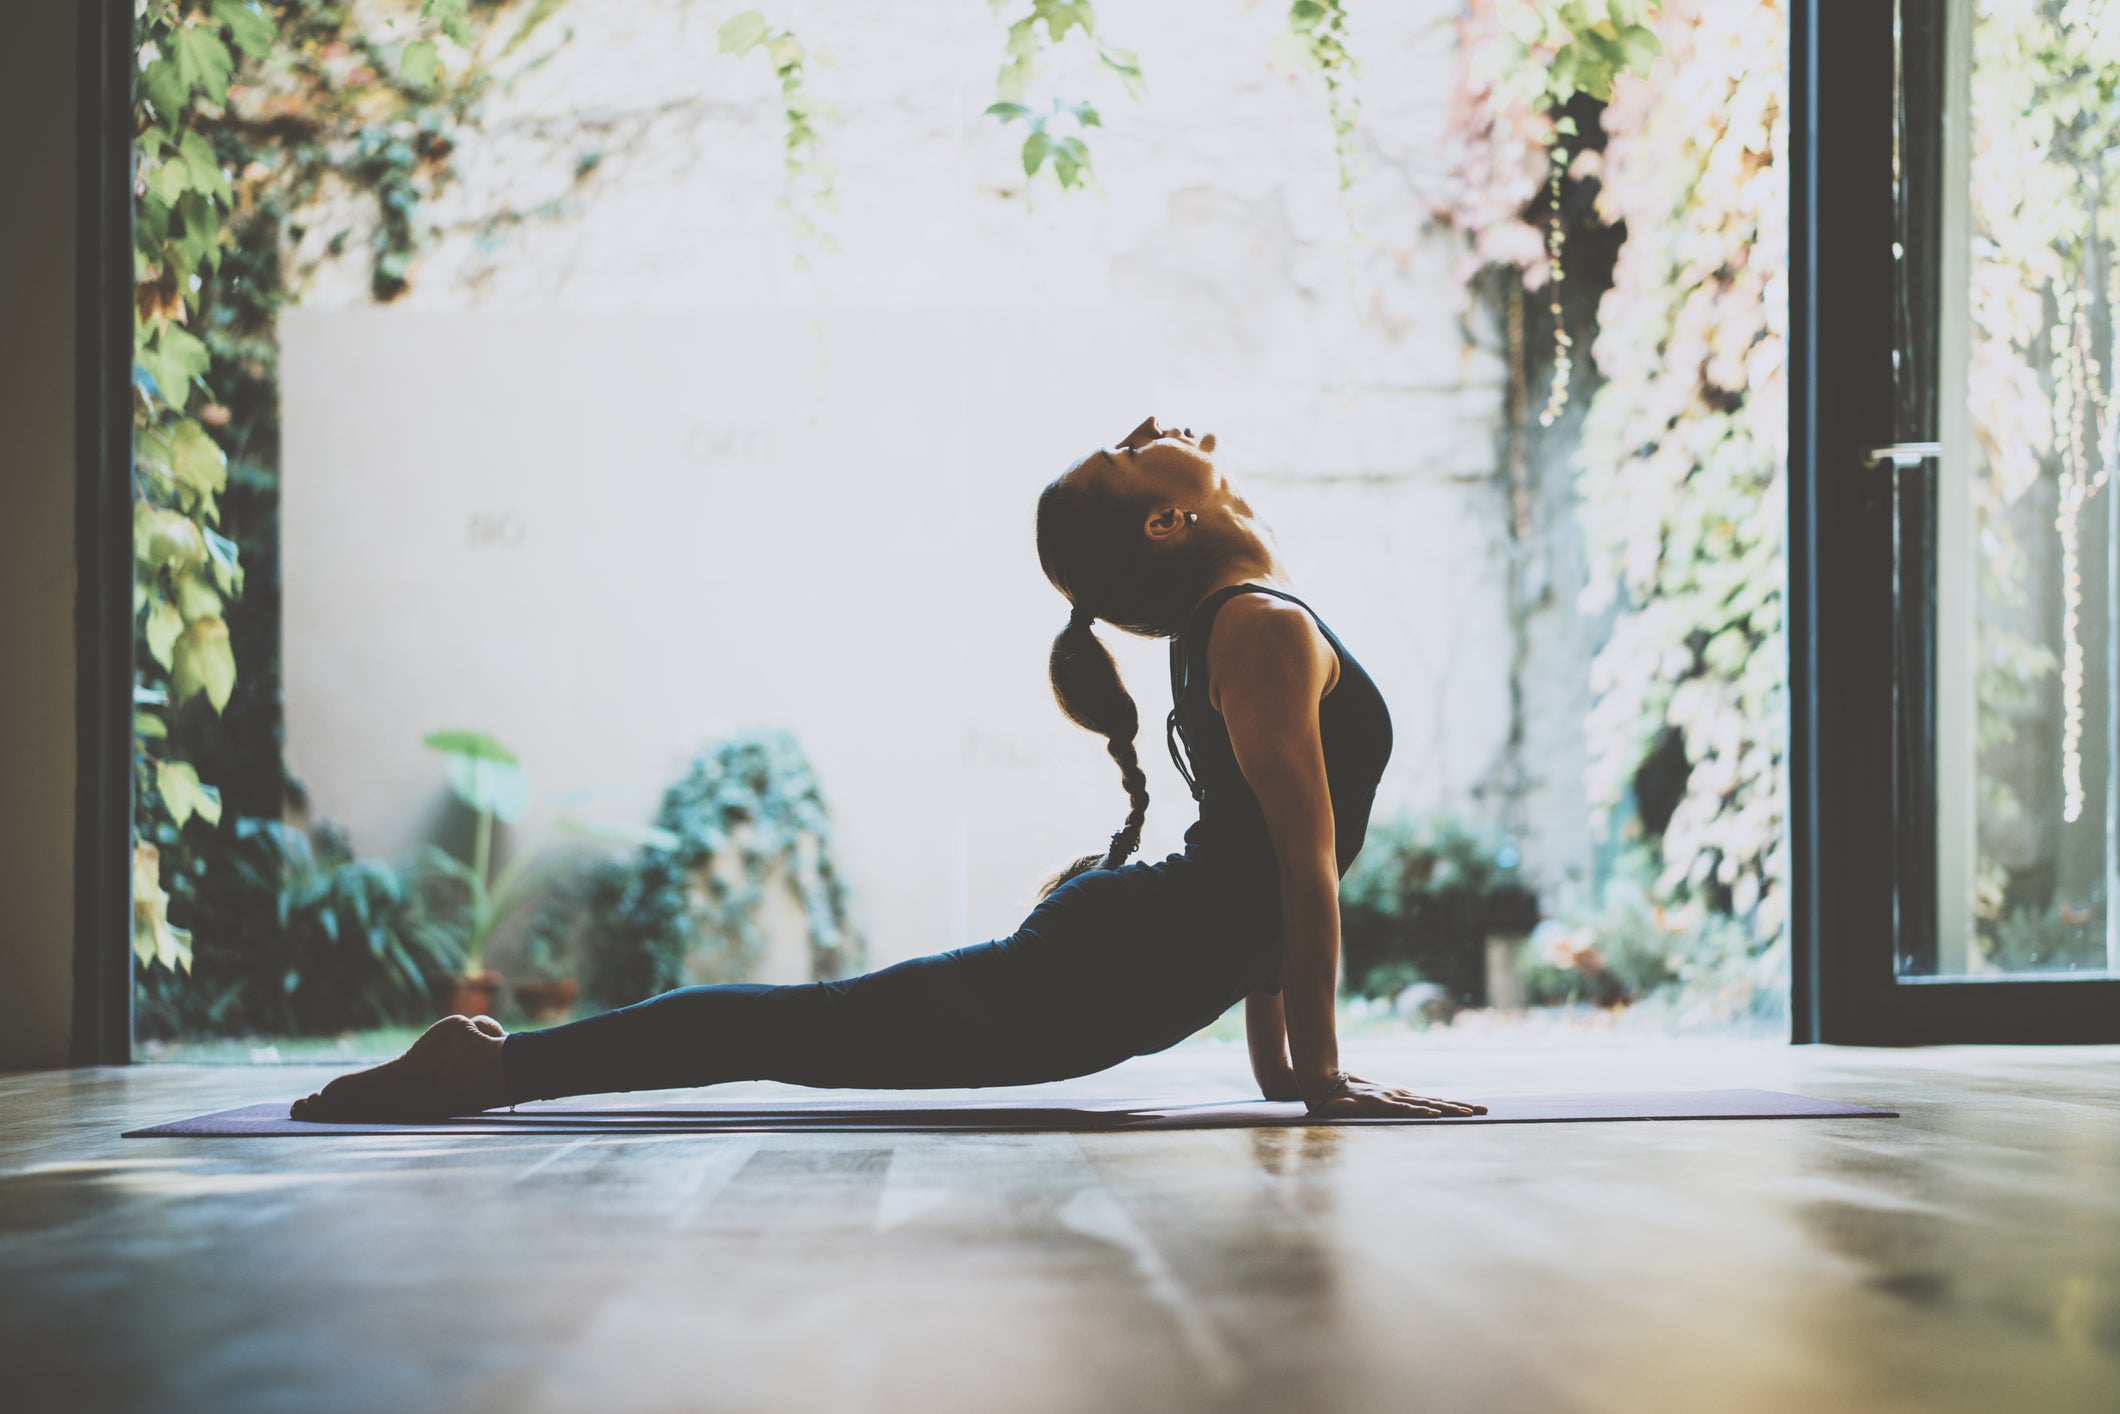 Gaga for yoga: the practice is a multibillion-dollar industry in the US